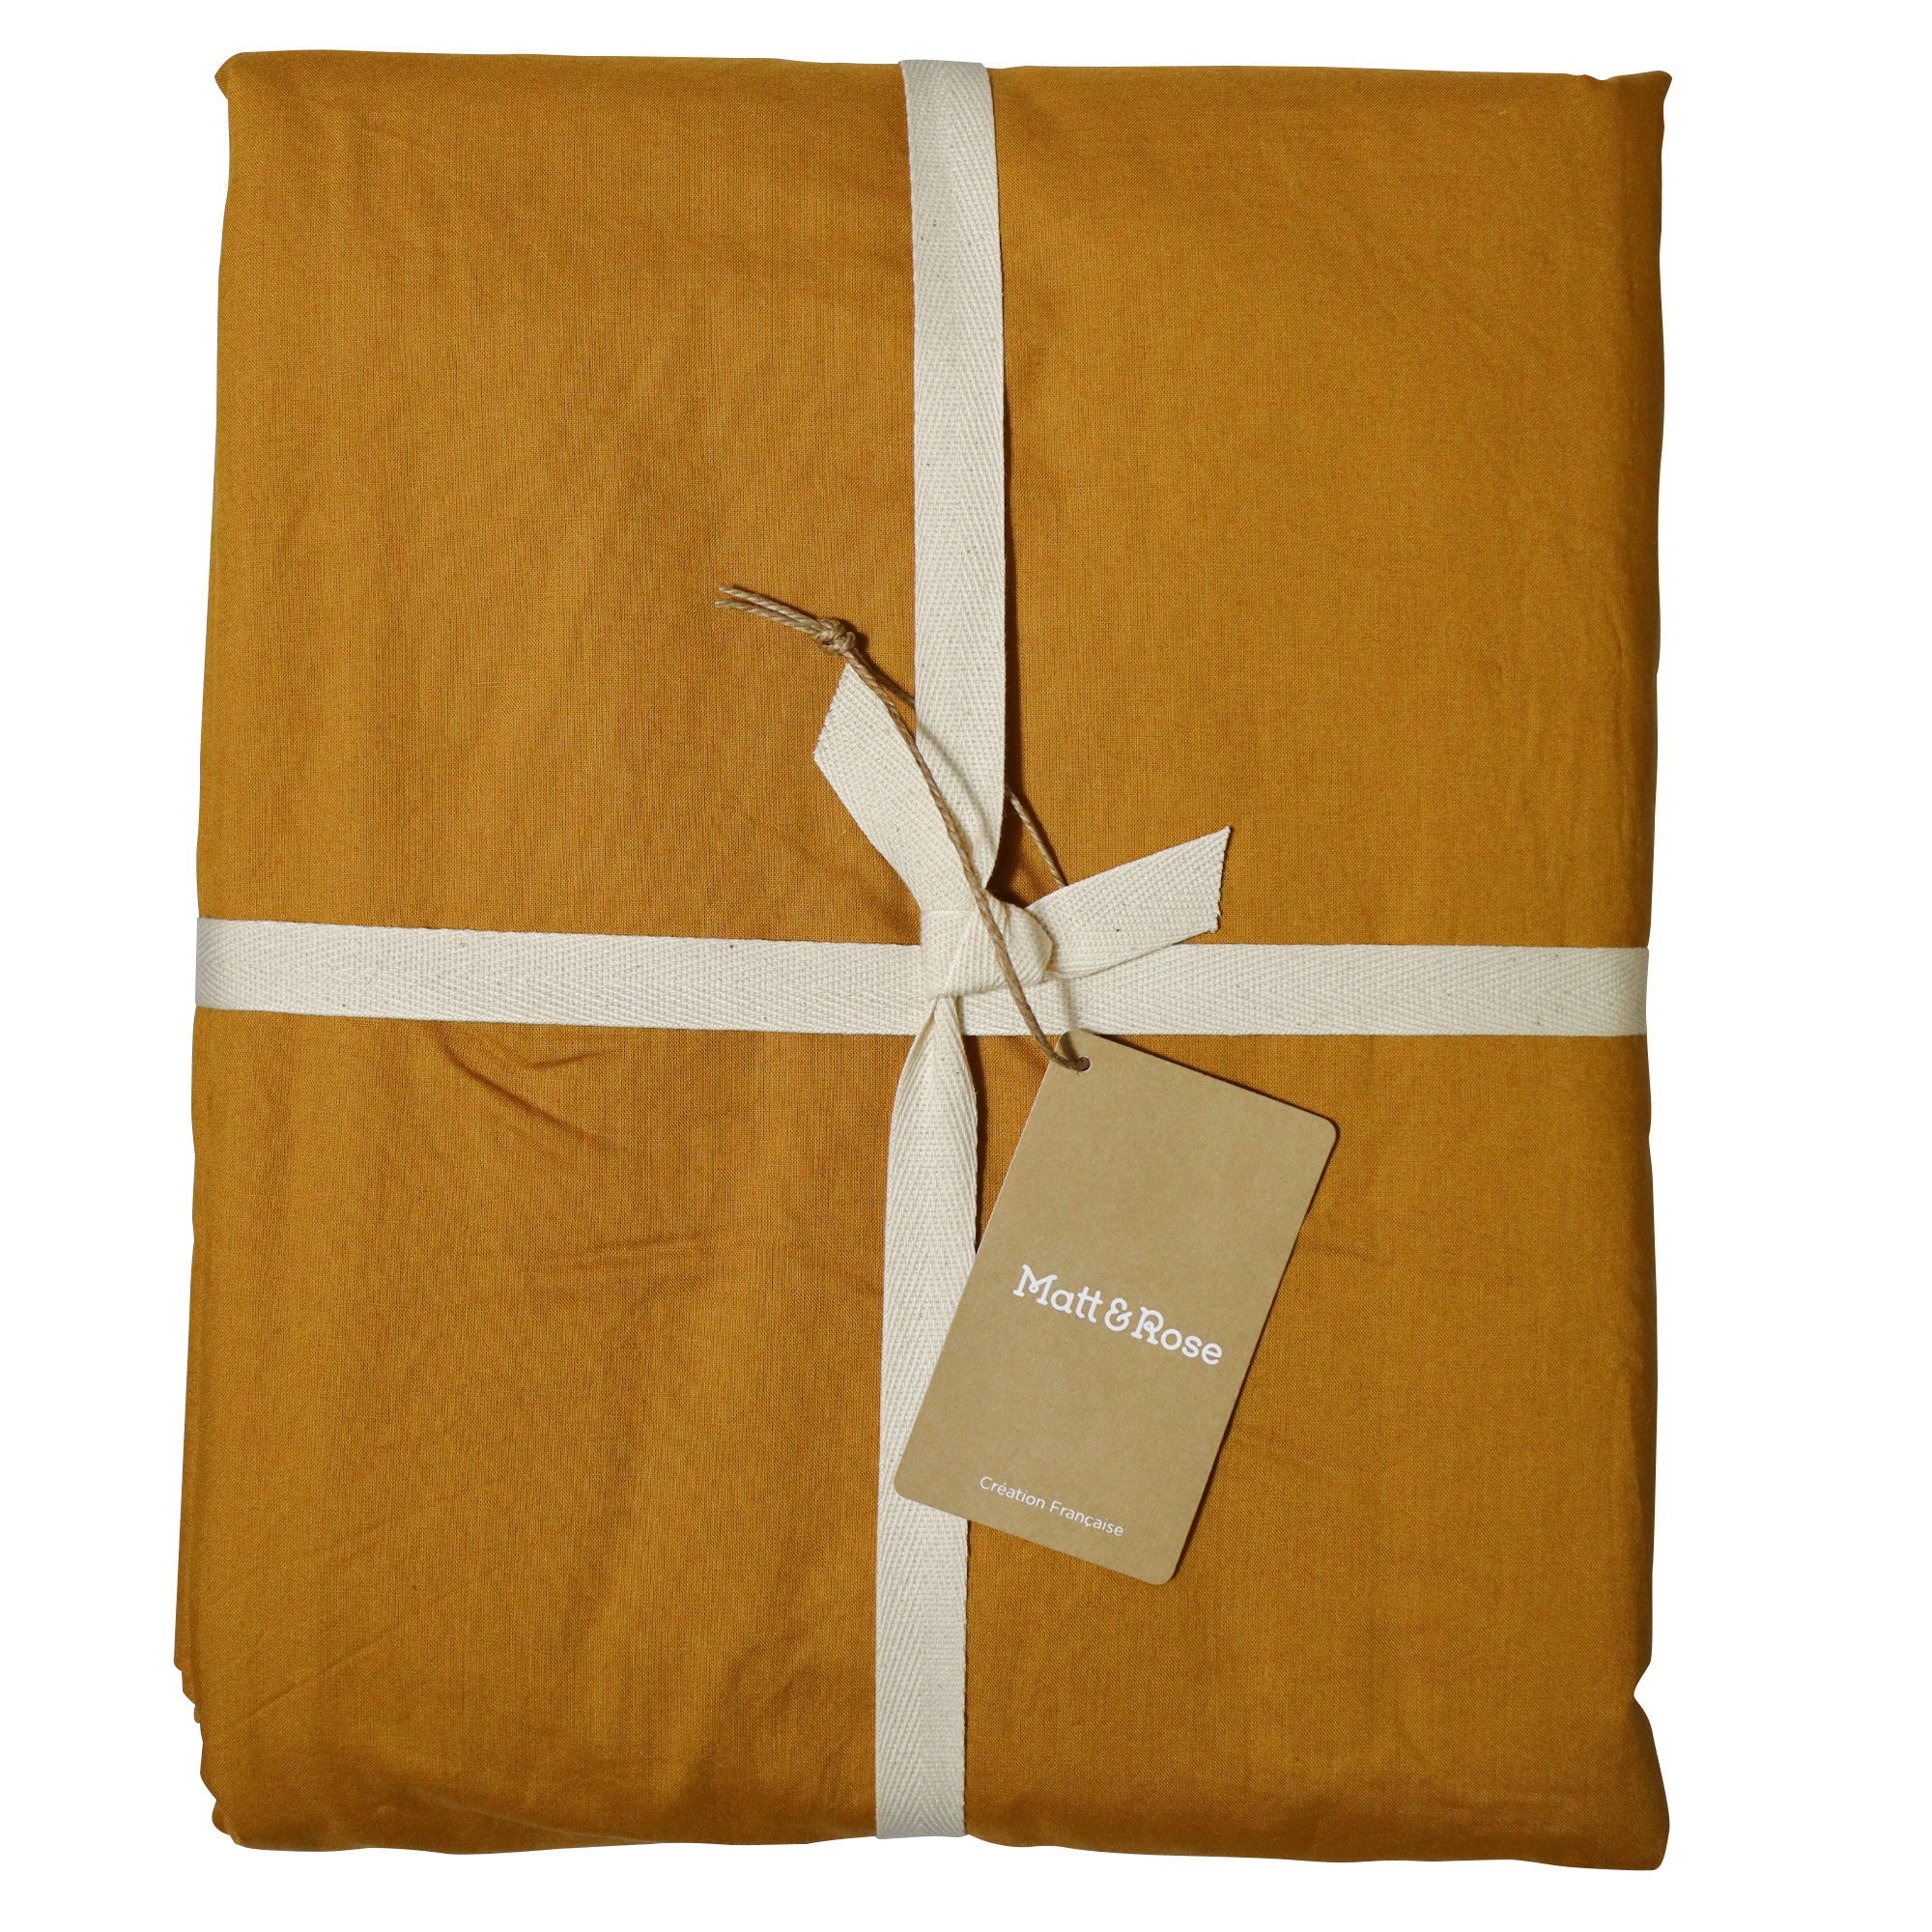 Matt & Rose Fitted sheet Caramel - Double - 160 x 190/200 cm - Washed Cotton